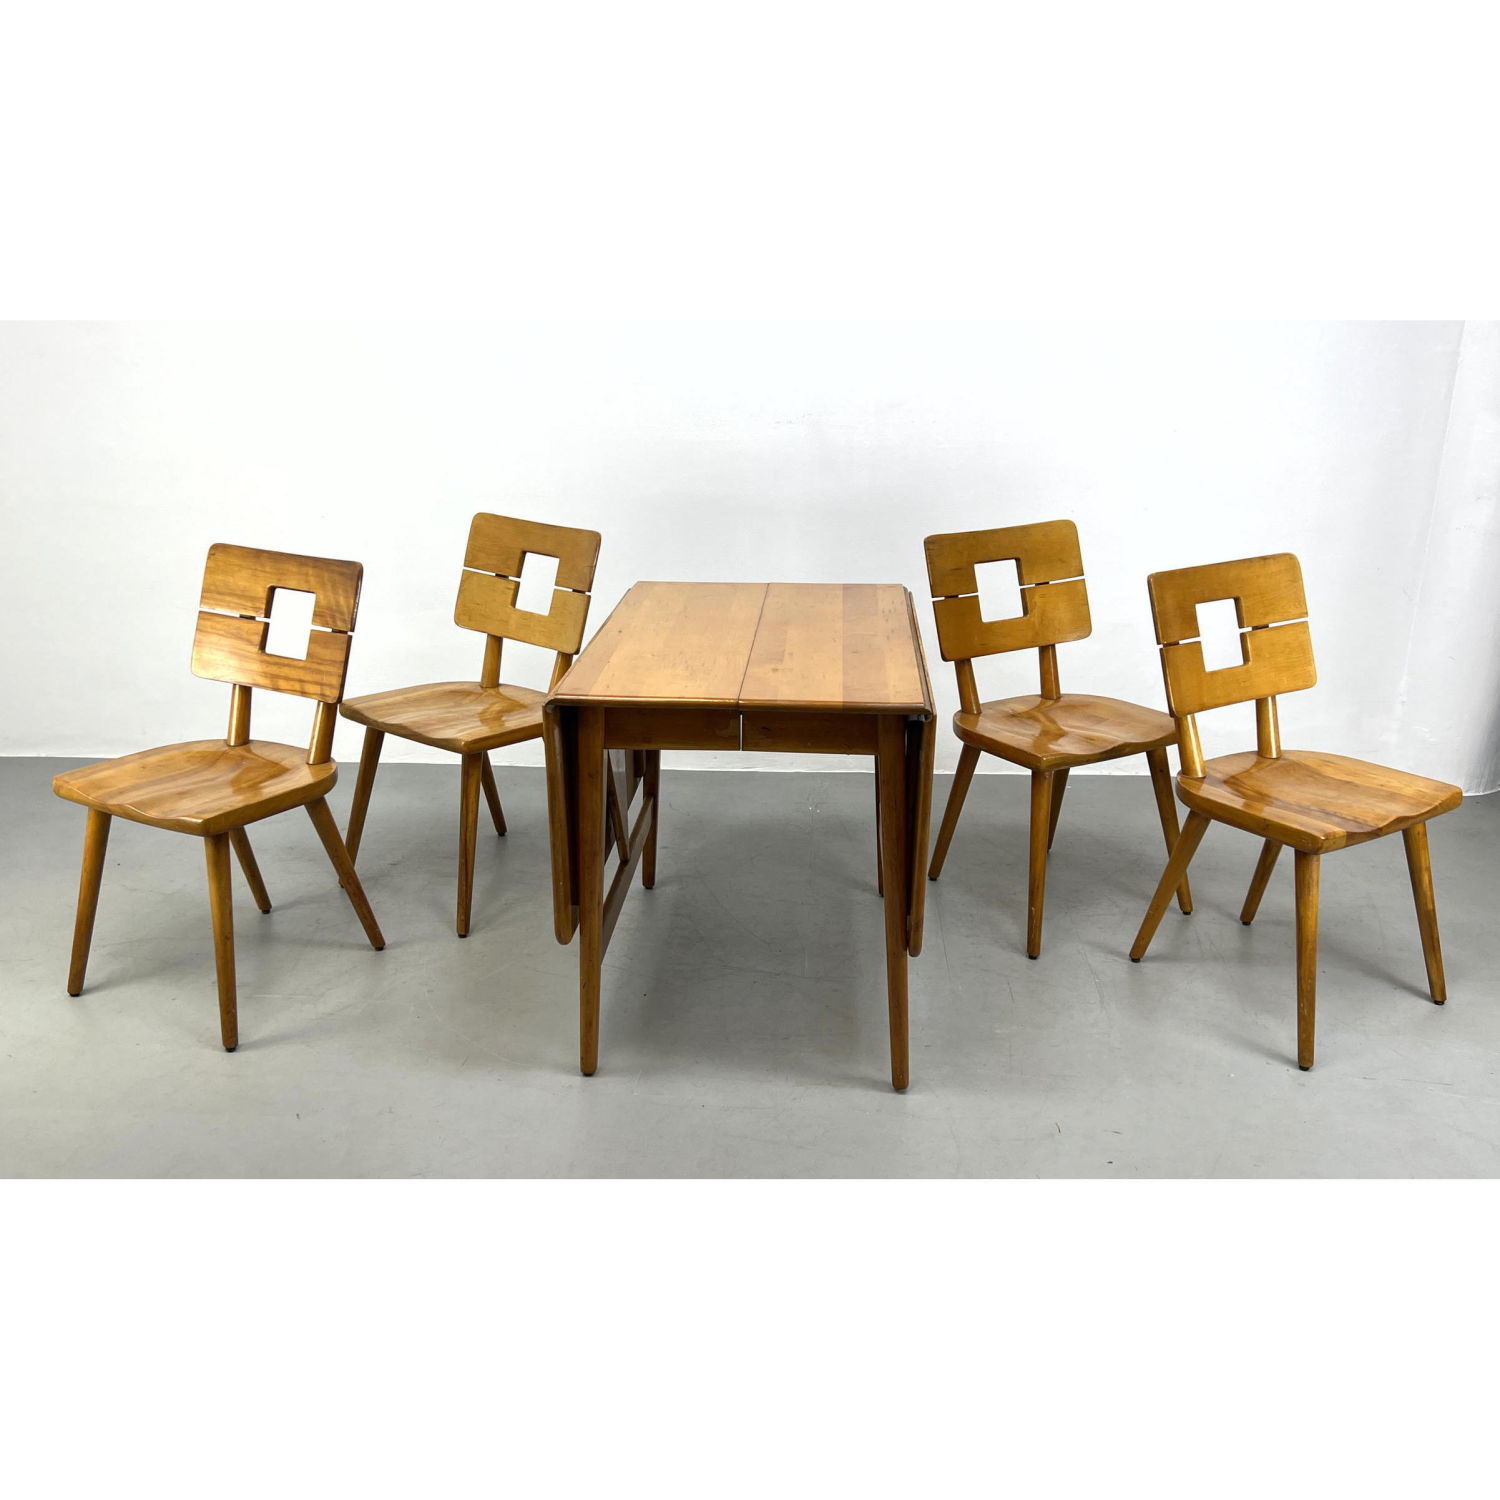 Rustic Maple Dining Set with 4 2b9dbb